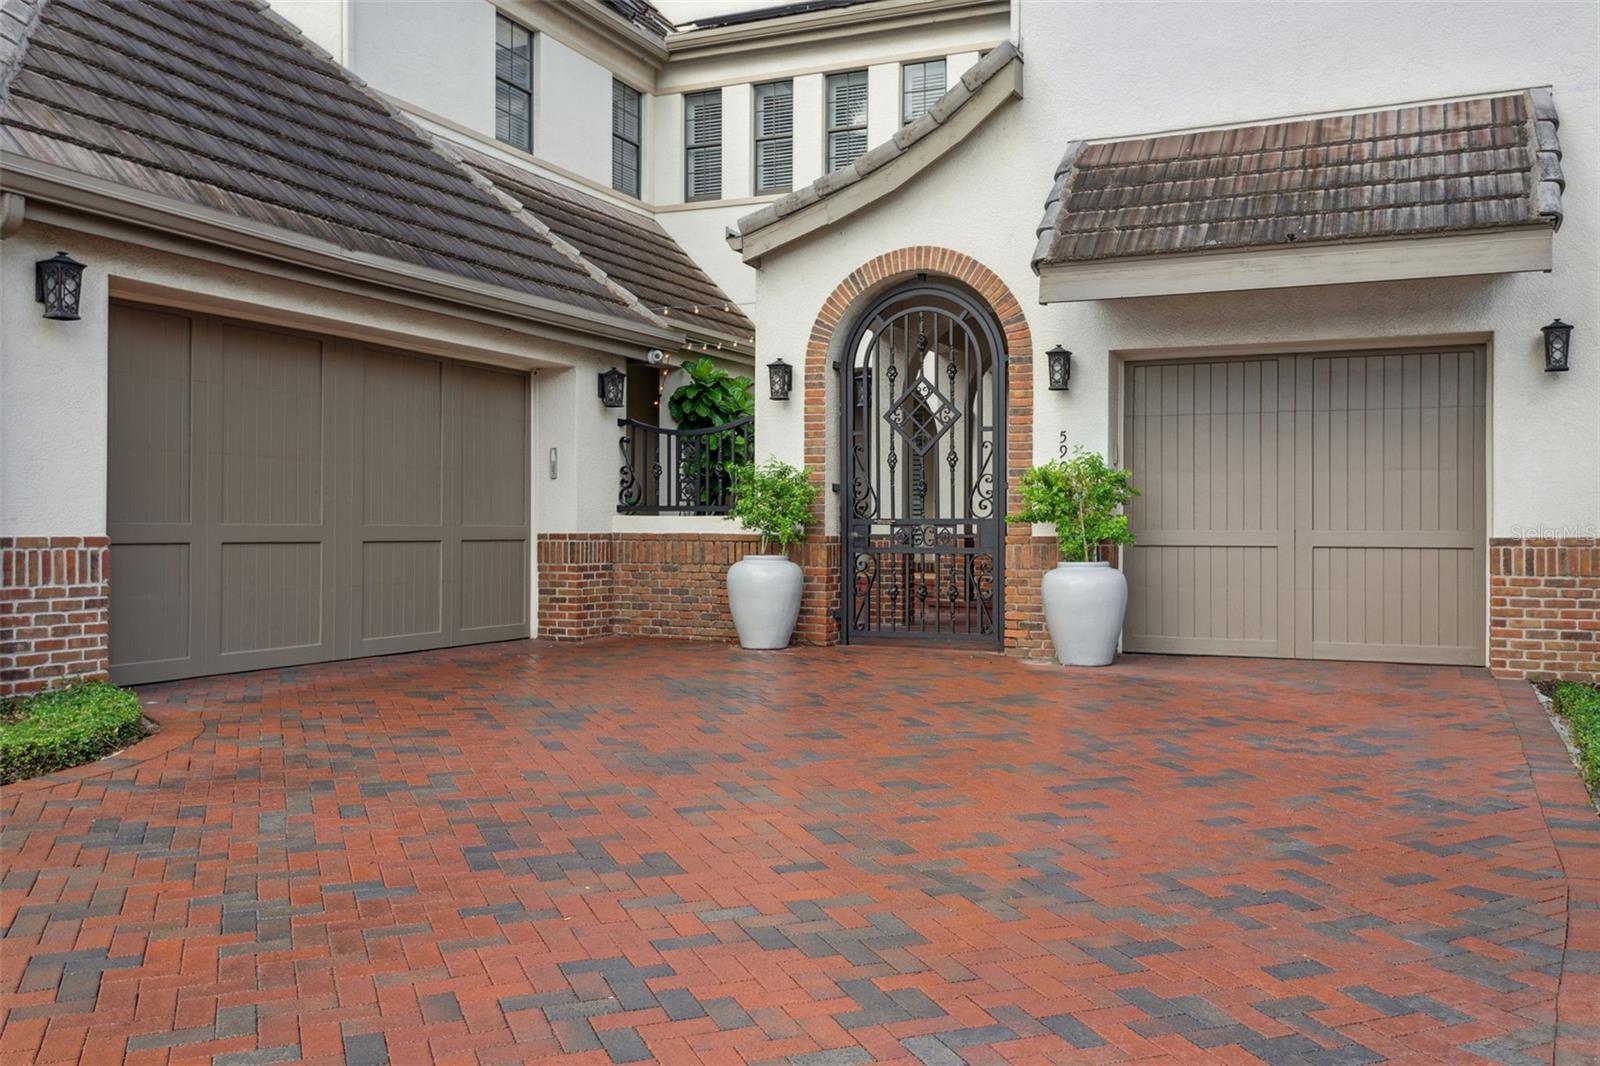 2-car and 1-car garages flank a private courtyard.